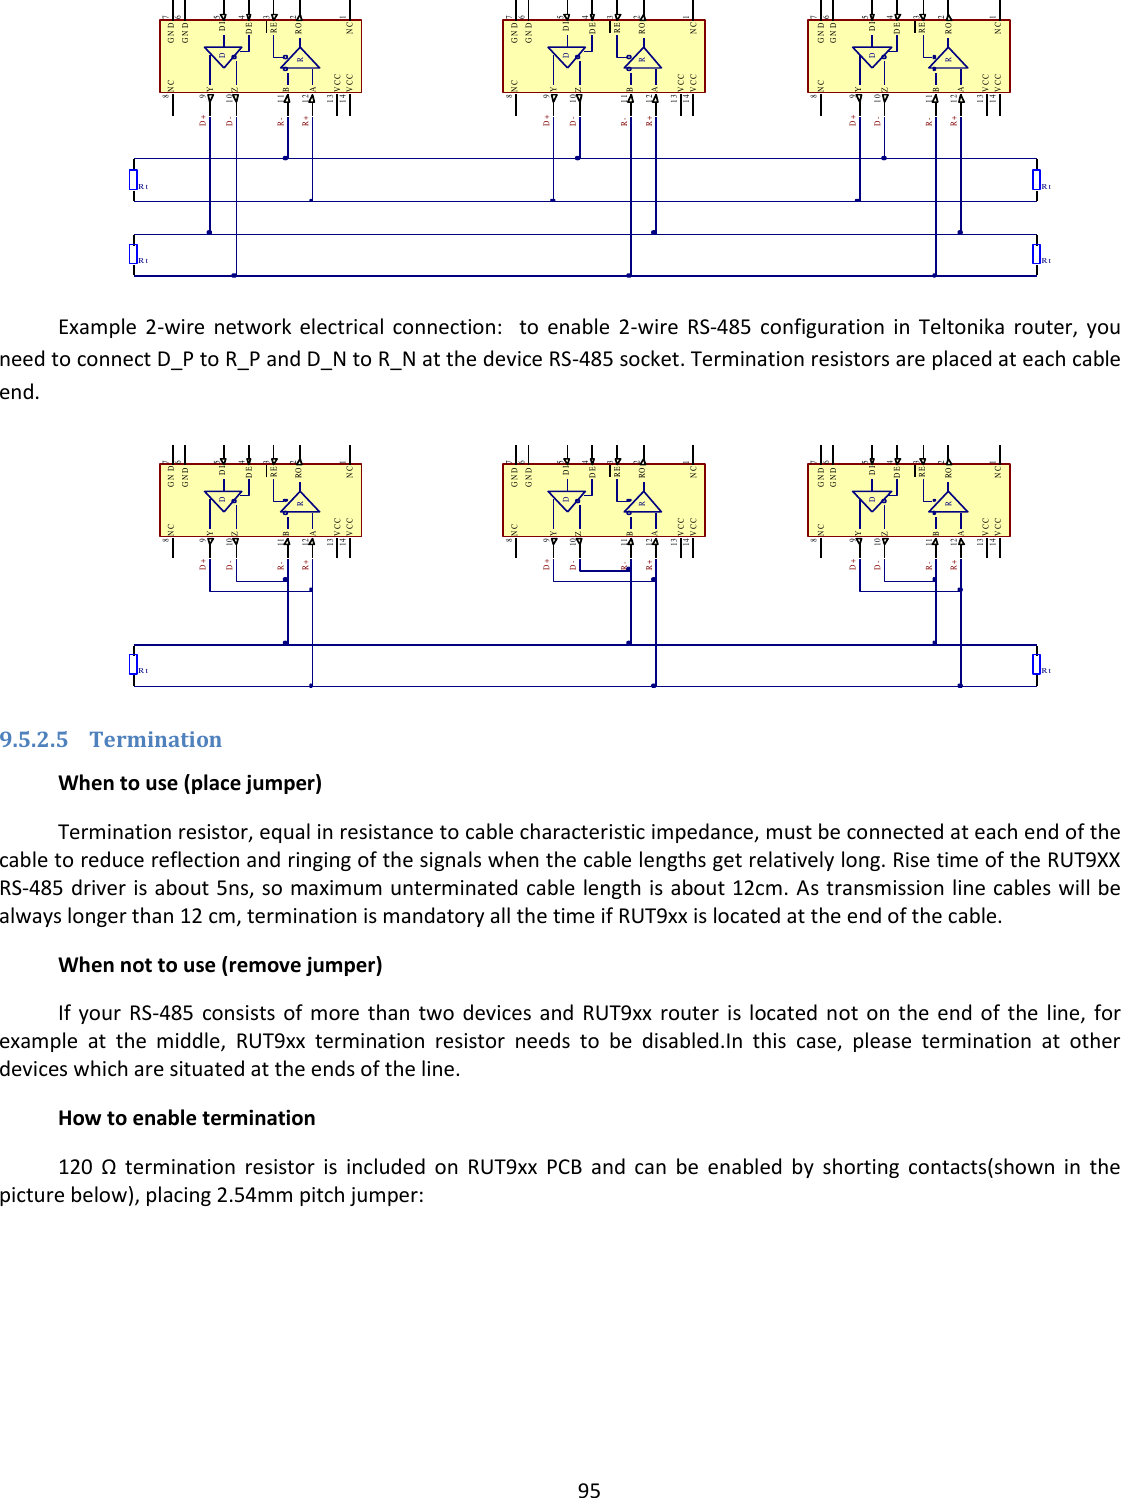  95   Example  2-wire  network electrical  connection:    to  enable 2-wire  RS-485  configuration  in  Teltonika router,  you need to connect D_P to R_P and D_N to R_N at the device RS-485 socket. Termination resistors are placed at each cable end.  9.5.2.5 Termination When to use (place jumper) Termination resistor, equal in resistance to cable characteristic impedance, must be connected at each end of the cable to reduce reflection and ringing of the signals when the cable lengths get relatively long. Rise time of the RUT9XX RS-485 driver is about 5ns, so maximum unterminated cable length is about 12cm. As transmission line cables will be always longer than 12 cm, termination is mandatory all the time if RUT9xx is located at the end of the cable. When not to use (remove jumper) If  your RS-485  consists  of more than  two devices  and  RUT9xx  router is  located  not  on the  end of  the line,  for example  at  the  middle,  RUT9xx  termination  resistor  needs  to  be  disabled.In  this  case,  please  termination  at  other devices which are situated at the ends of the line. How to enable termination 120  Ω  termination  resistor  is  included  on  RUT9xx  PCB  and  can  be  enabled  by  shorting  contacts(shown  in  the picture below), placing 2.54mm pitch jumper: V CC13RO 2DI5GND 6Y9Z10B11A12 RDGND 7RE 3DE4NC1NC8V CC14V CC13RO 2DI5GND 6Y9Z10B11A12 RDGND 7RE 3DE4NC1NC8V CC14V CC13RO 2DI5GND 6Y9Z10B11A12 RDGND 7RE 3DE4NC1NC8V CC14D+D-R-R+RtRtRtRtD+D-R-R+D+D-R-R+V CC13RO 2DI5GND 6Y9Z10B11A12 RDG N D 7RE 3DE4NC1NC8V CC14V CC13RO 2DI5GND 6Y9Z10B11A12 RDGND 7RE 3DE4NC1NC8V CC14V CC13RO 2DI5GND 6Y9Z10B11A12 RDGND 7RE 3DE4NC1NC8V CC14D+D-R-R+Rt RtD+D-R-R+D+D-R-R+